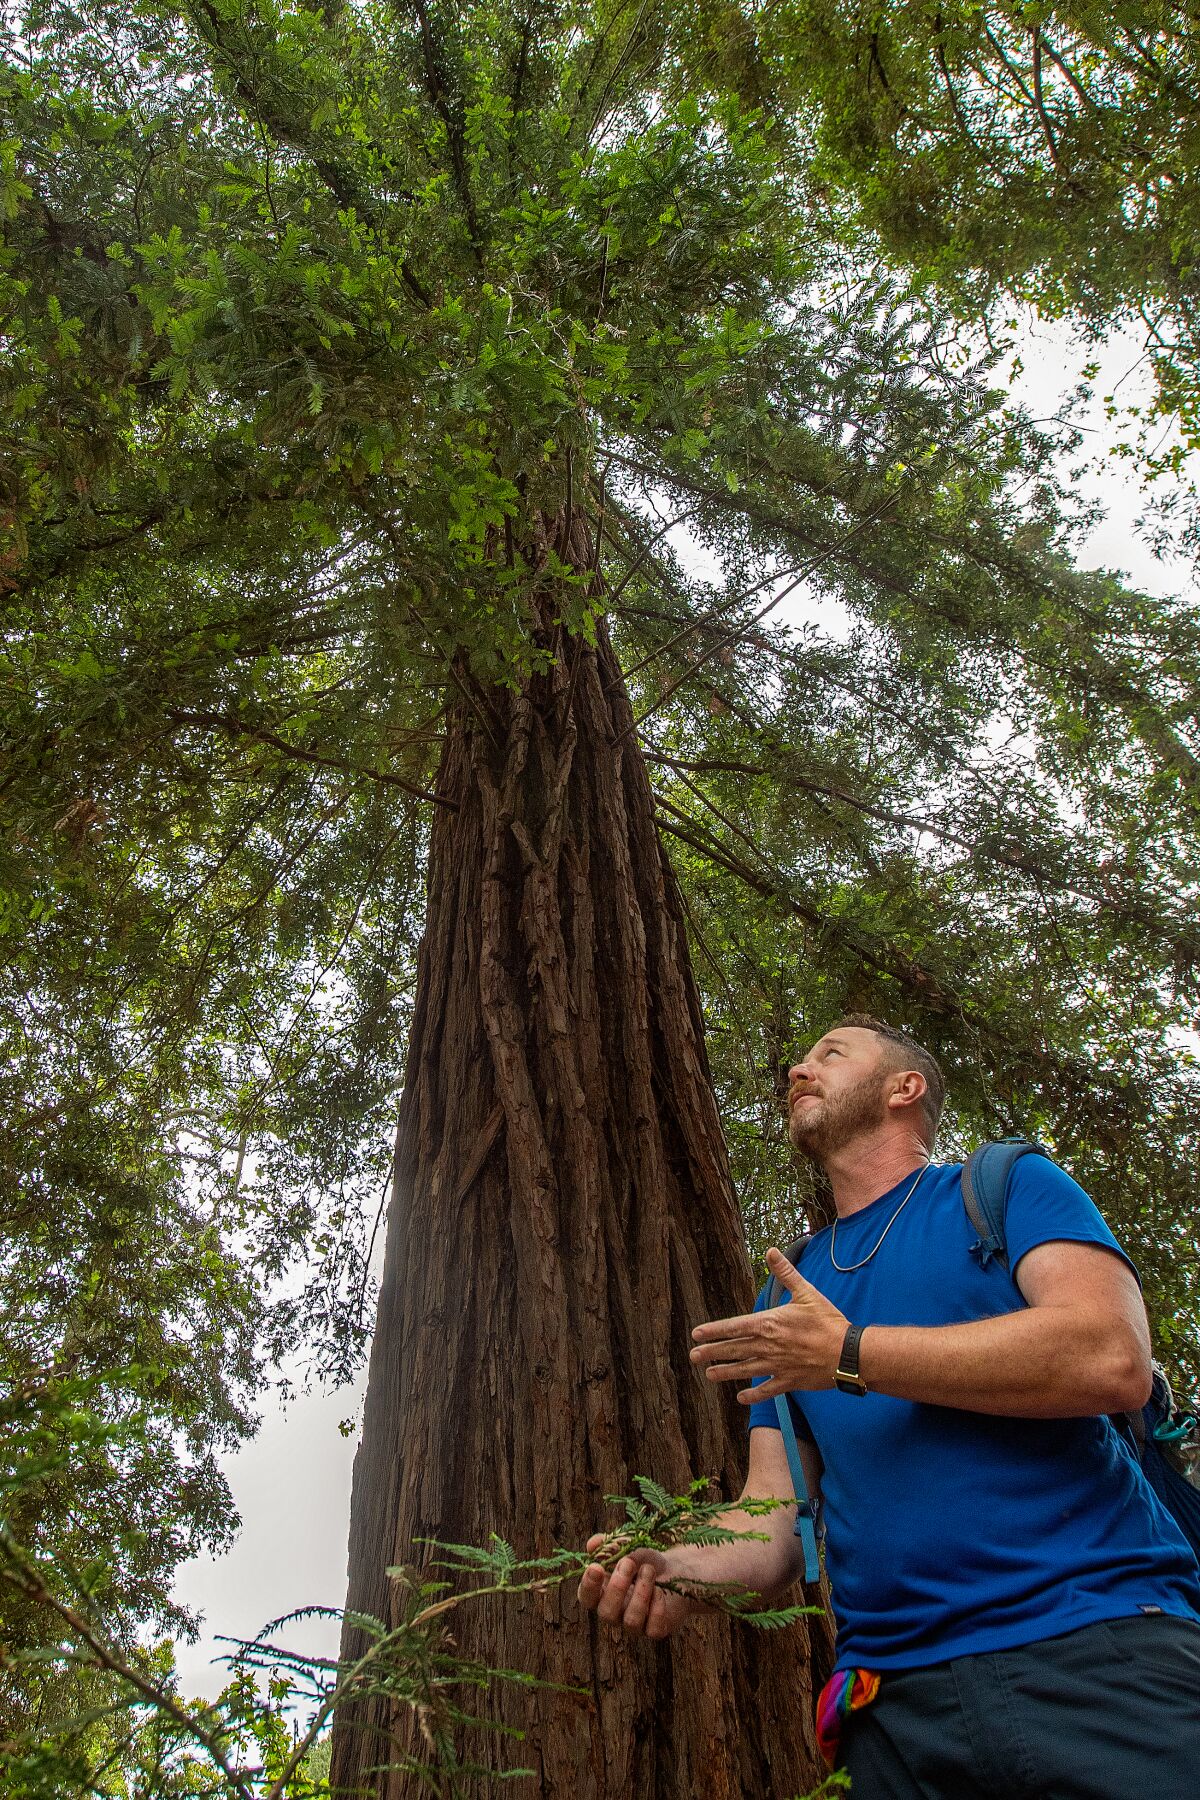 A man looks up at the tall, spreading branches of the redwood tree far above him.